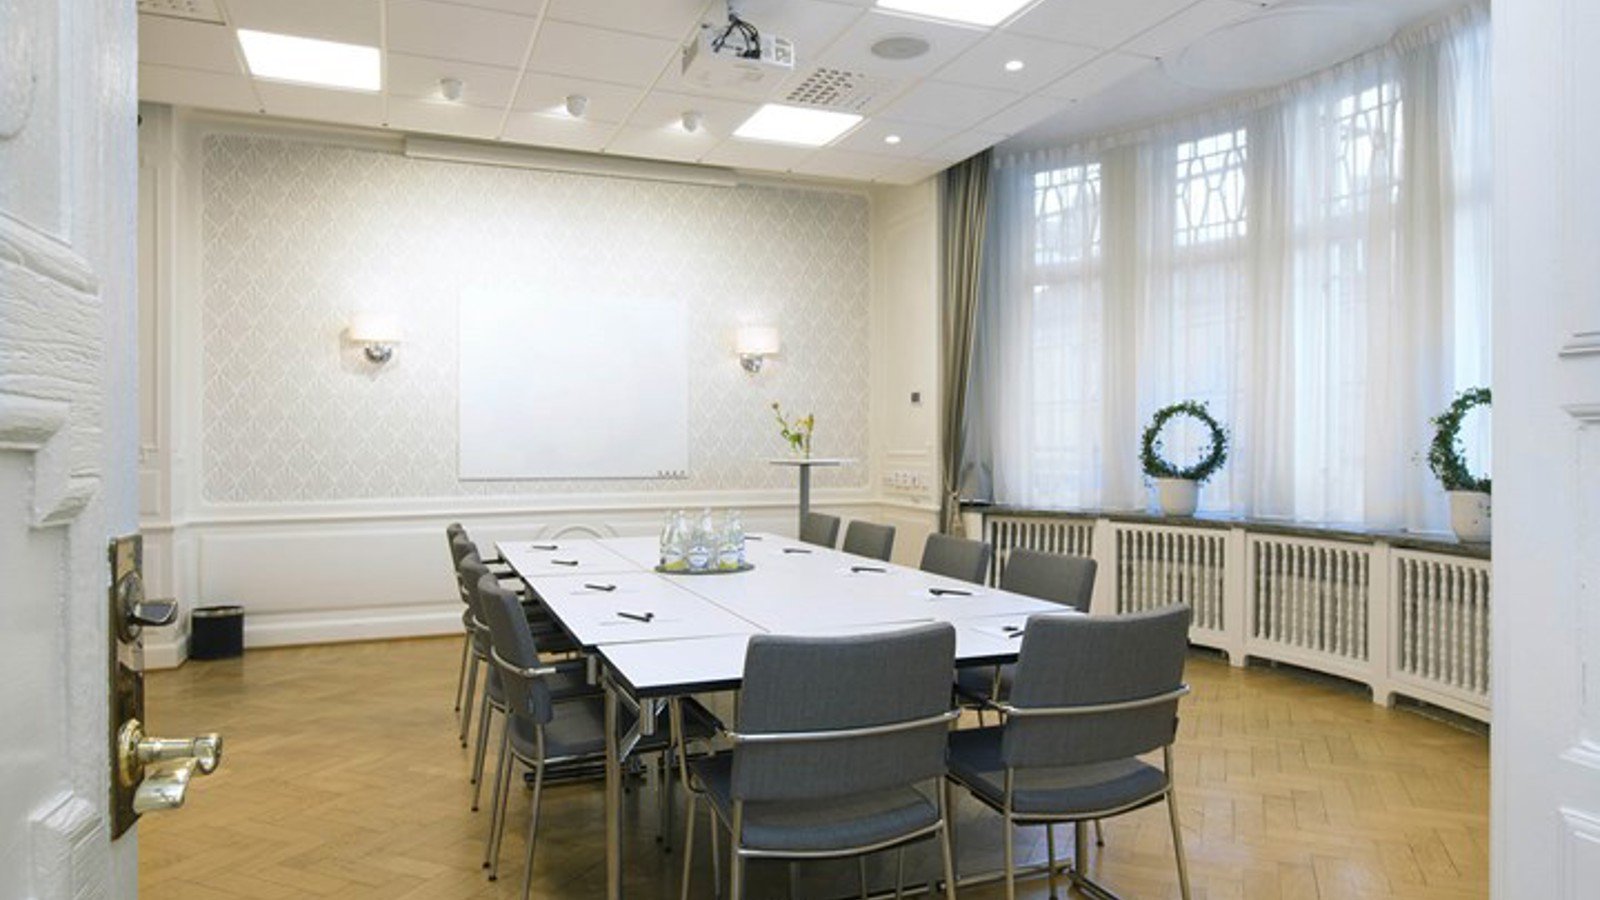 Conference room with board seating, gray chairs, white walls